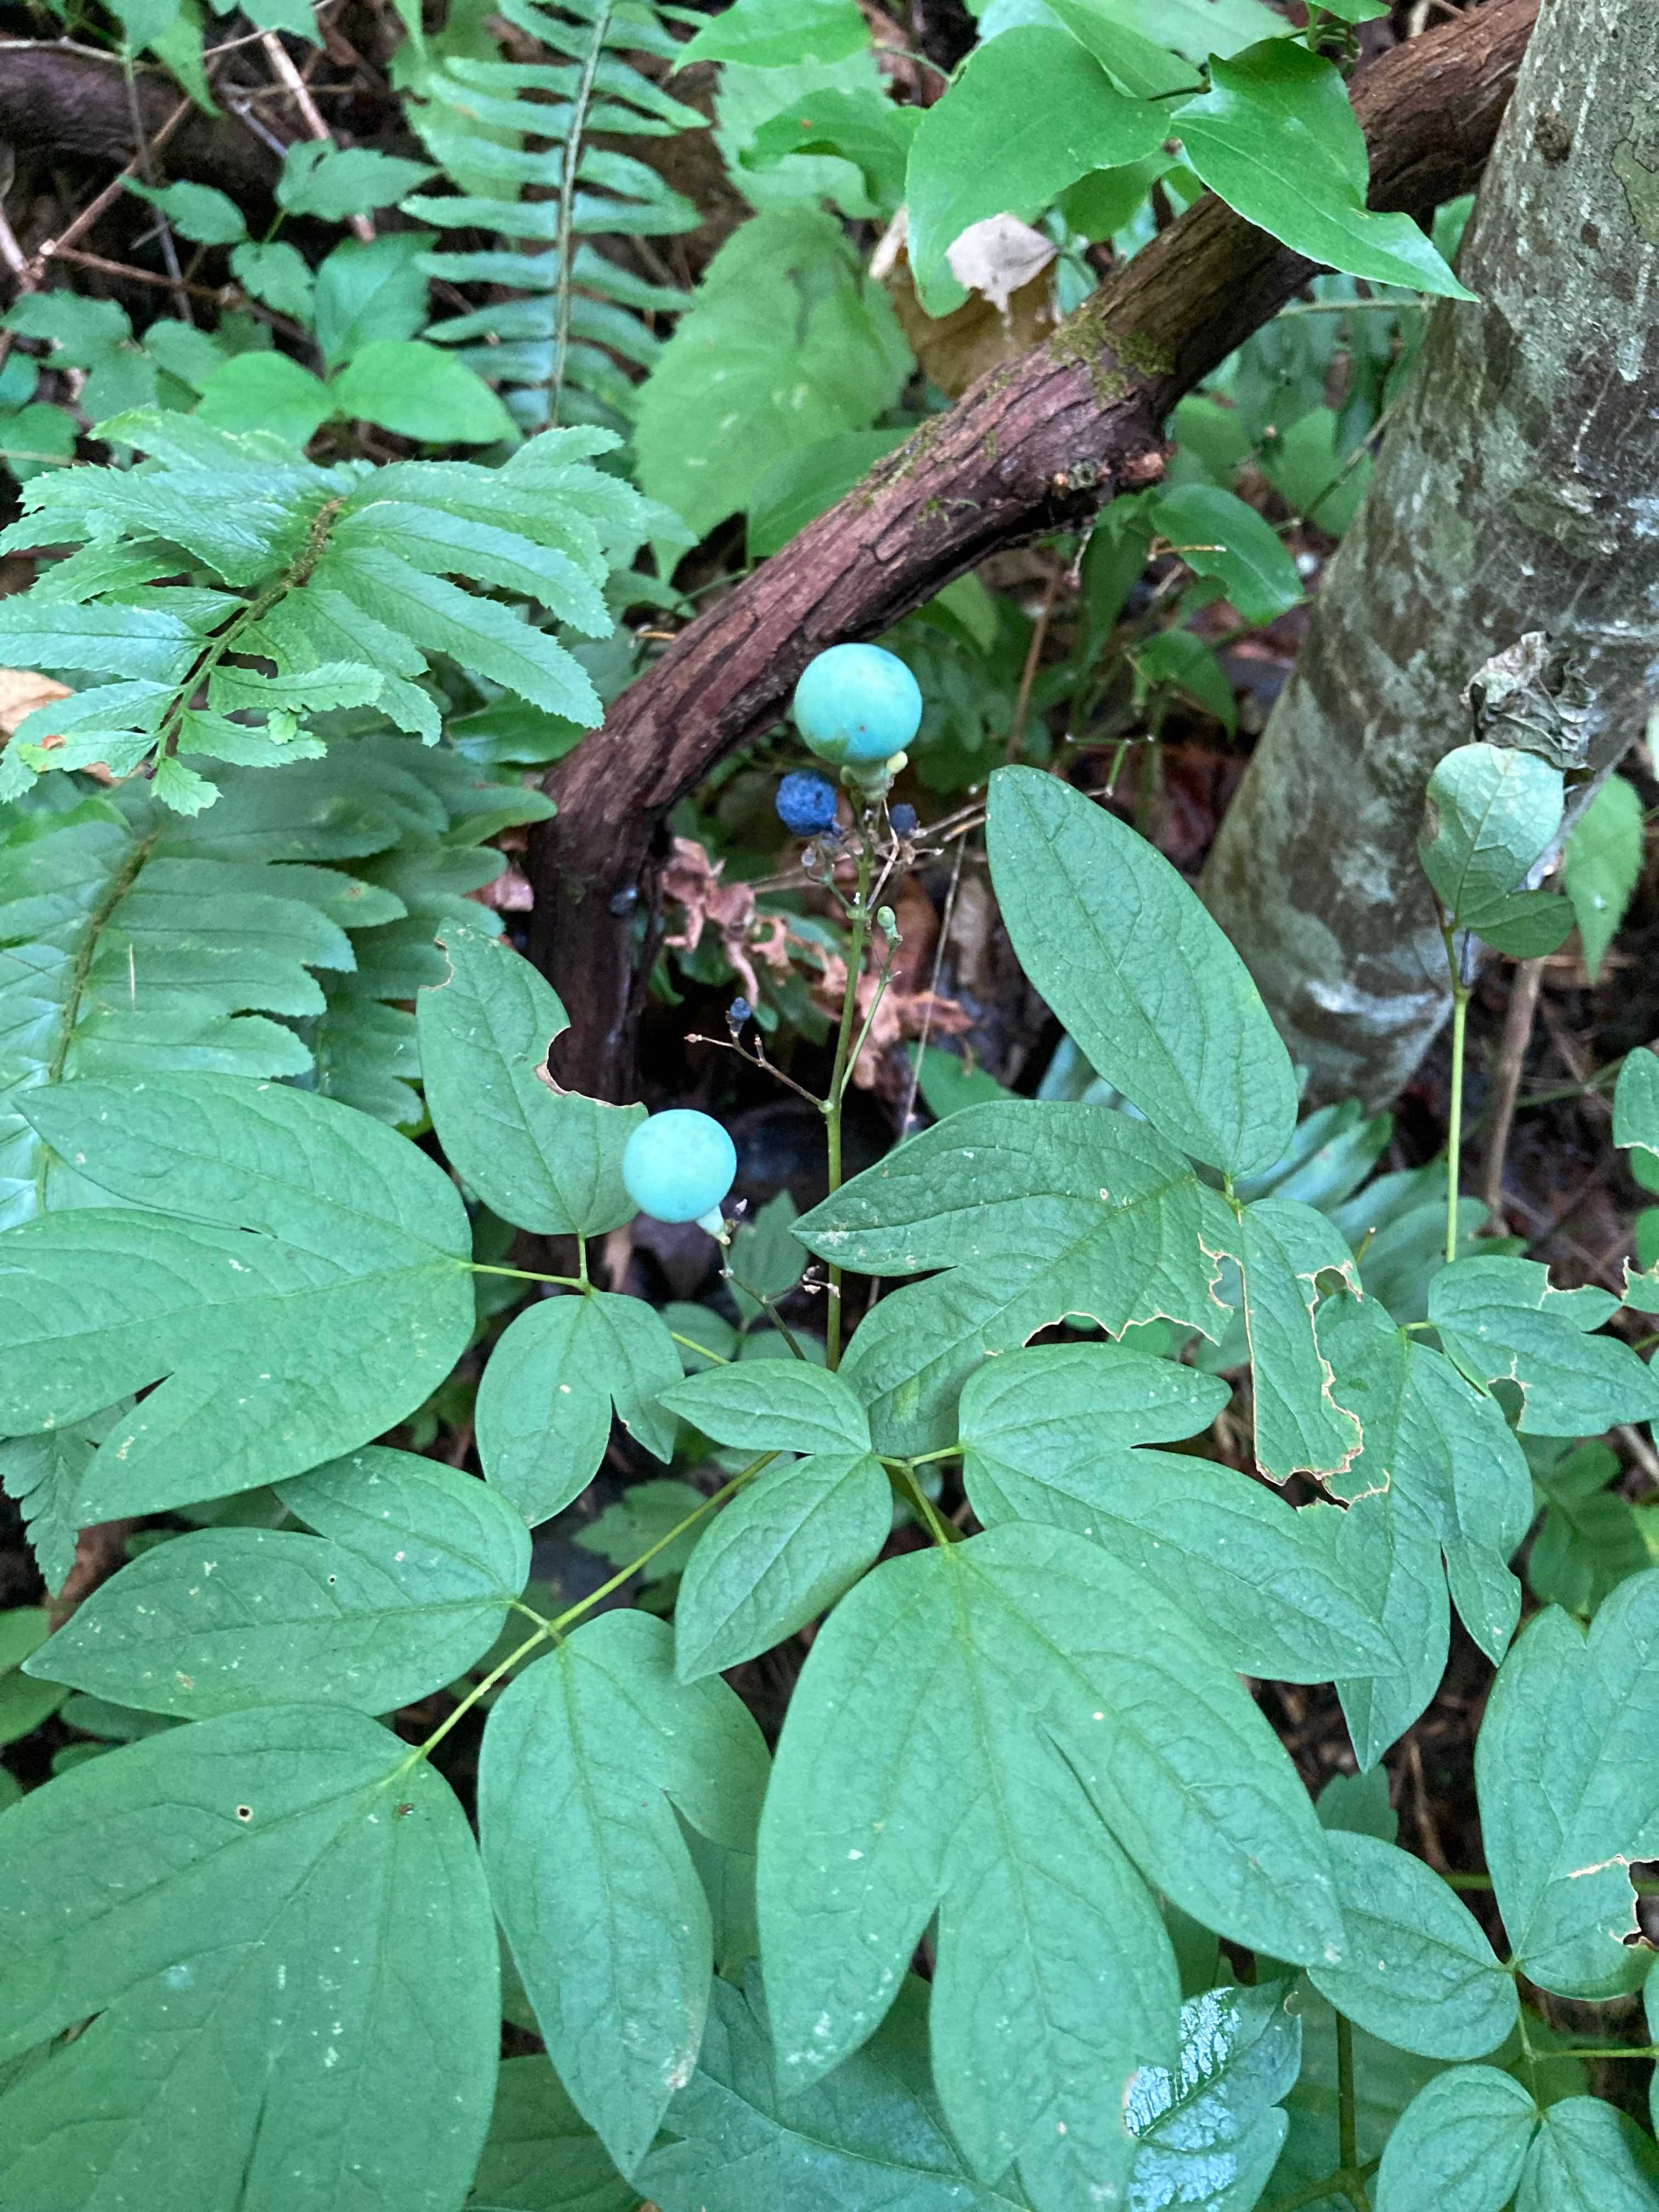 The Scientific Name is Caulophyllum thalictroides. You will likely hear them called Blue Cohosh, Papooseroot. This picture shows the Fruit develops in the summer (July-Aug) of Caulophyllum thalictroides